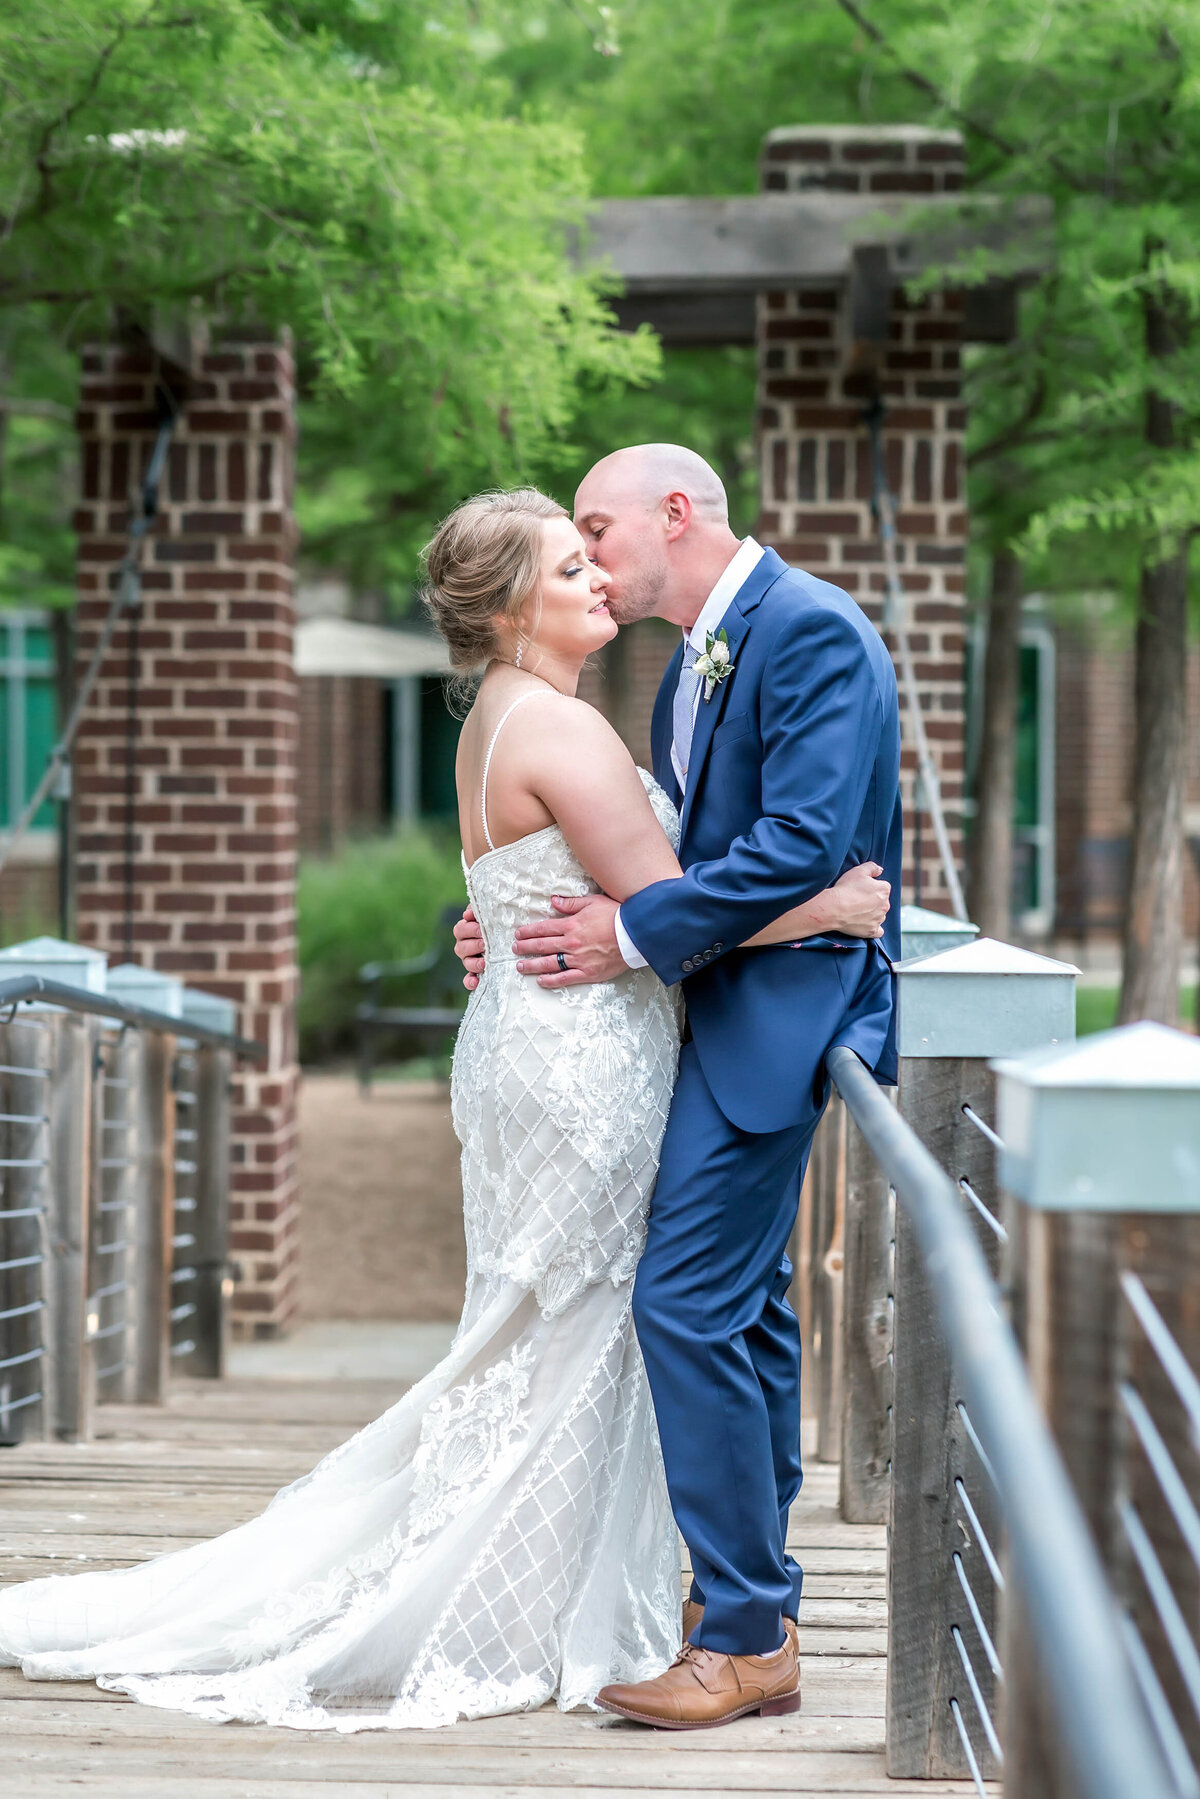 Bride is wearing a lace spaghetti strapped wedding dress and groom is wearing a blue suit.  Couple are standing on the bridge at the Willows Event Center in Lubbock Texas.  Groom is kissing bride on the cheek as they are facing each other.